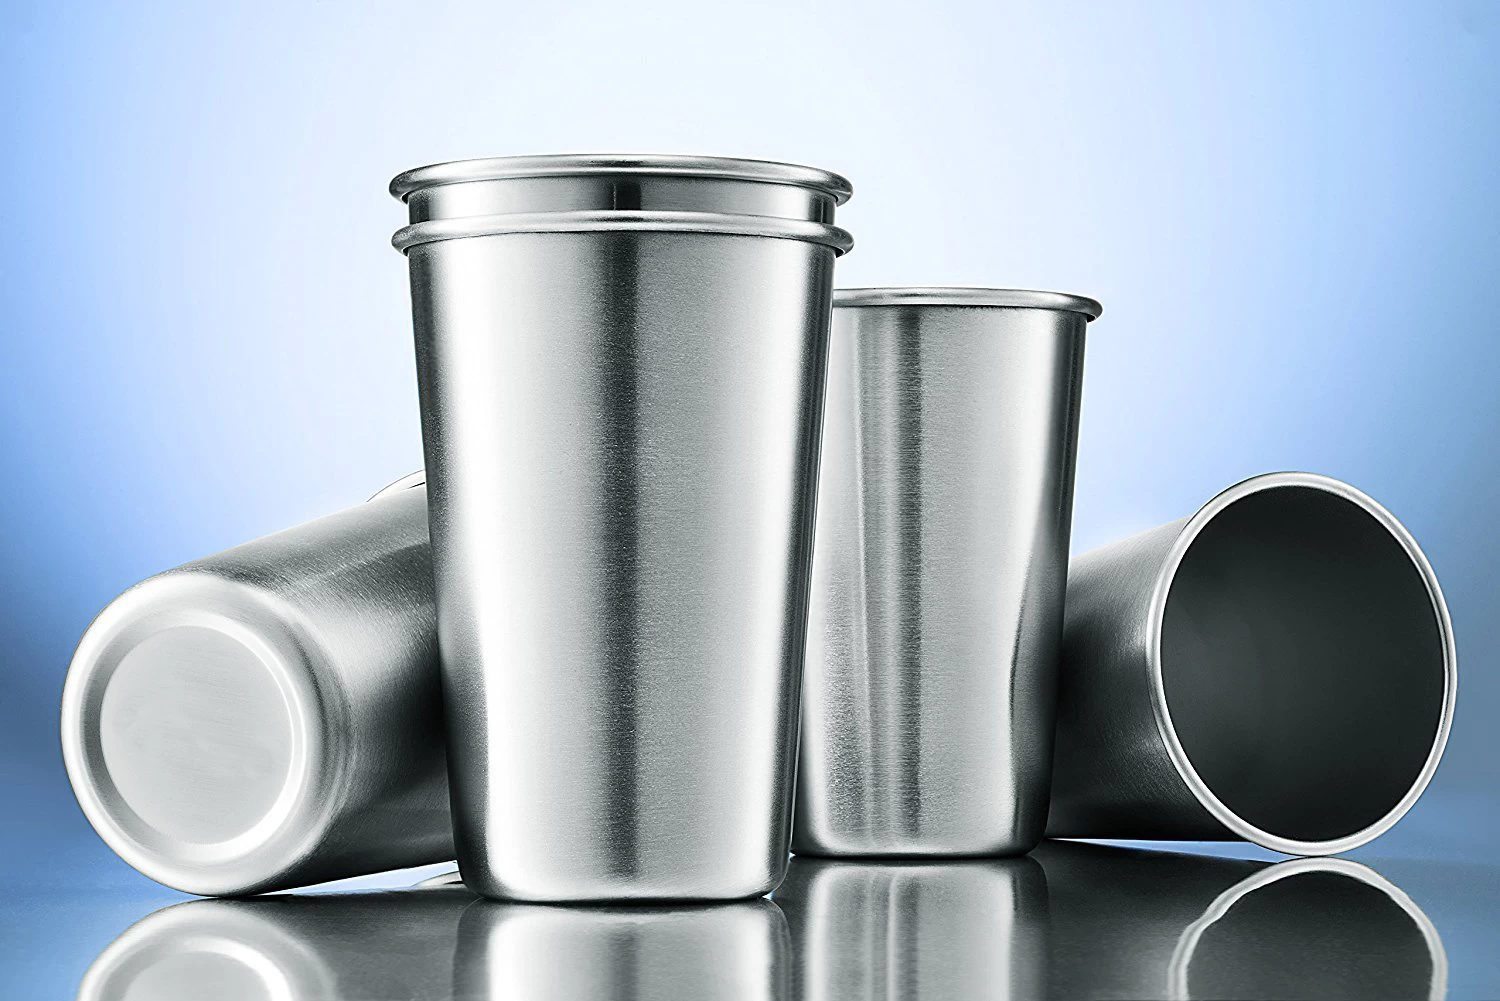 Stainless Steel coffee Cup supplier china Stainless Steel coffee Cup manufacturer china Stainless Steel coffee Cup wholesales china